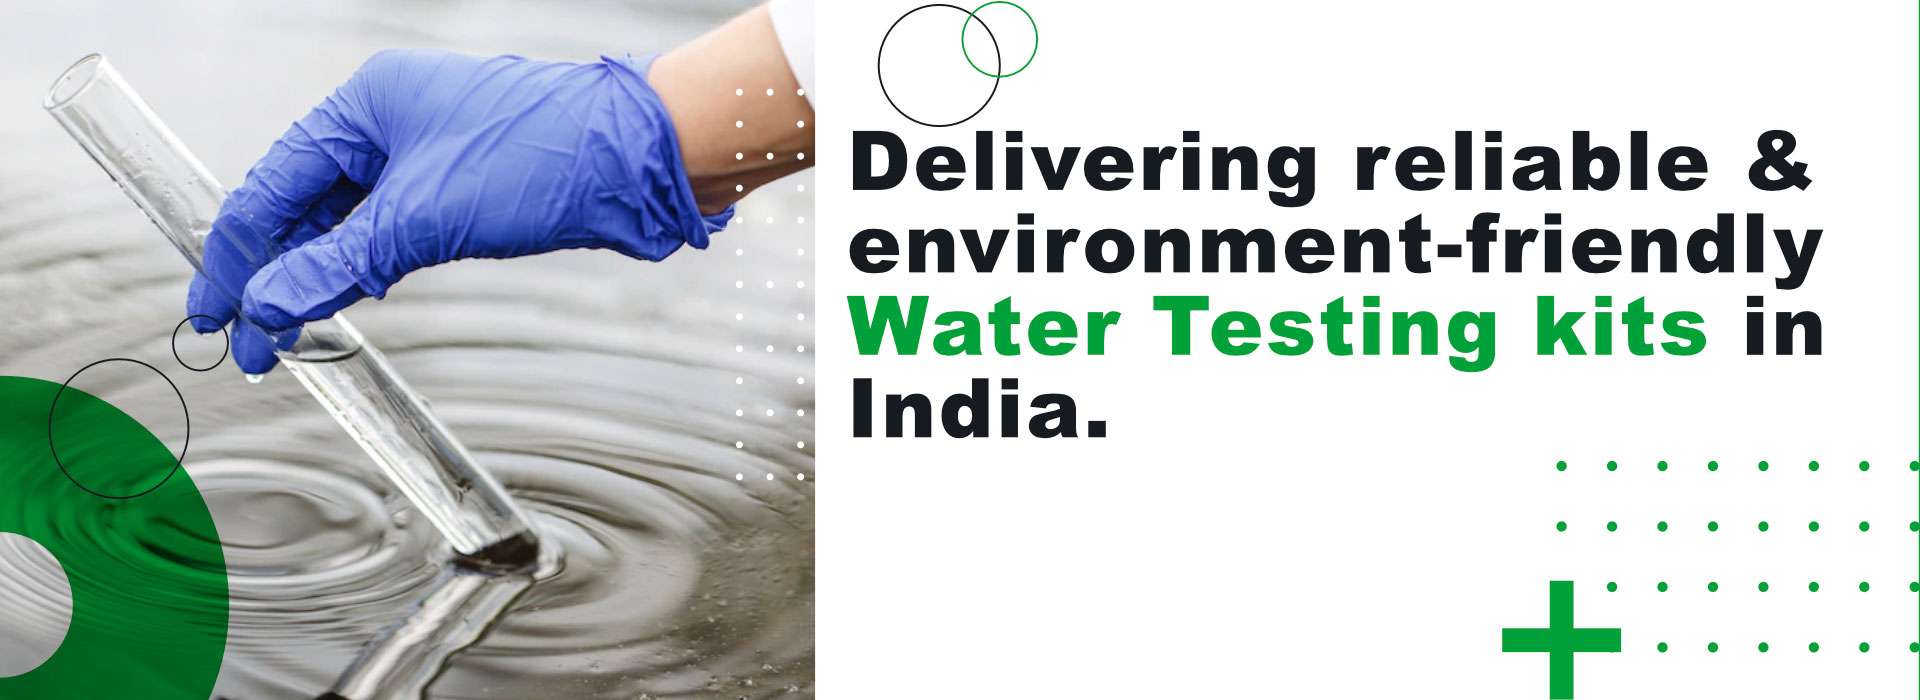  Delivering reliable & environment-friendly water Testing kits in India Manufacturers in 